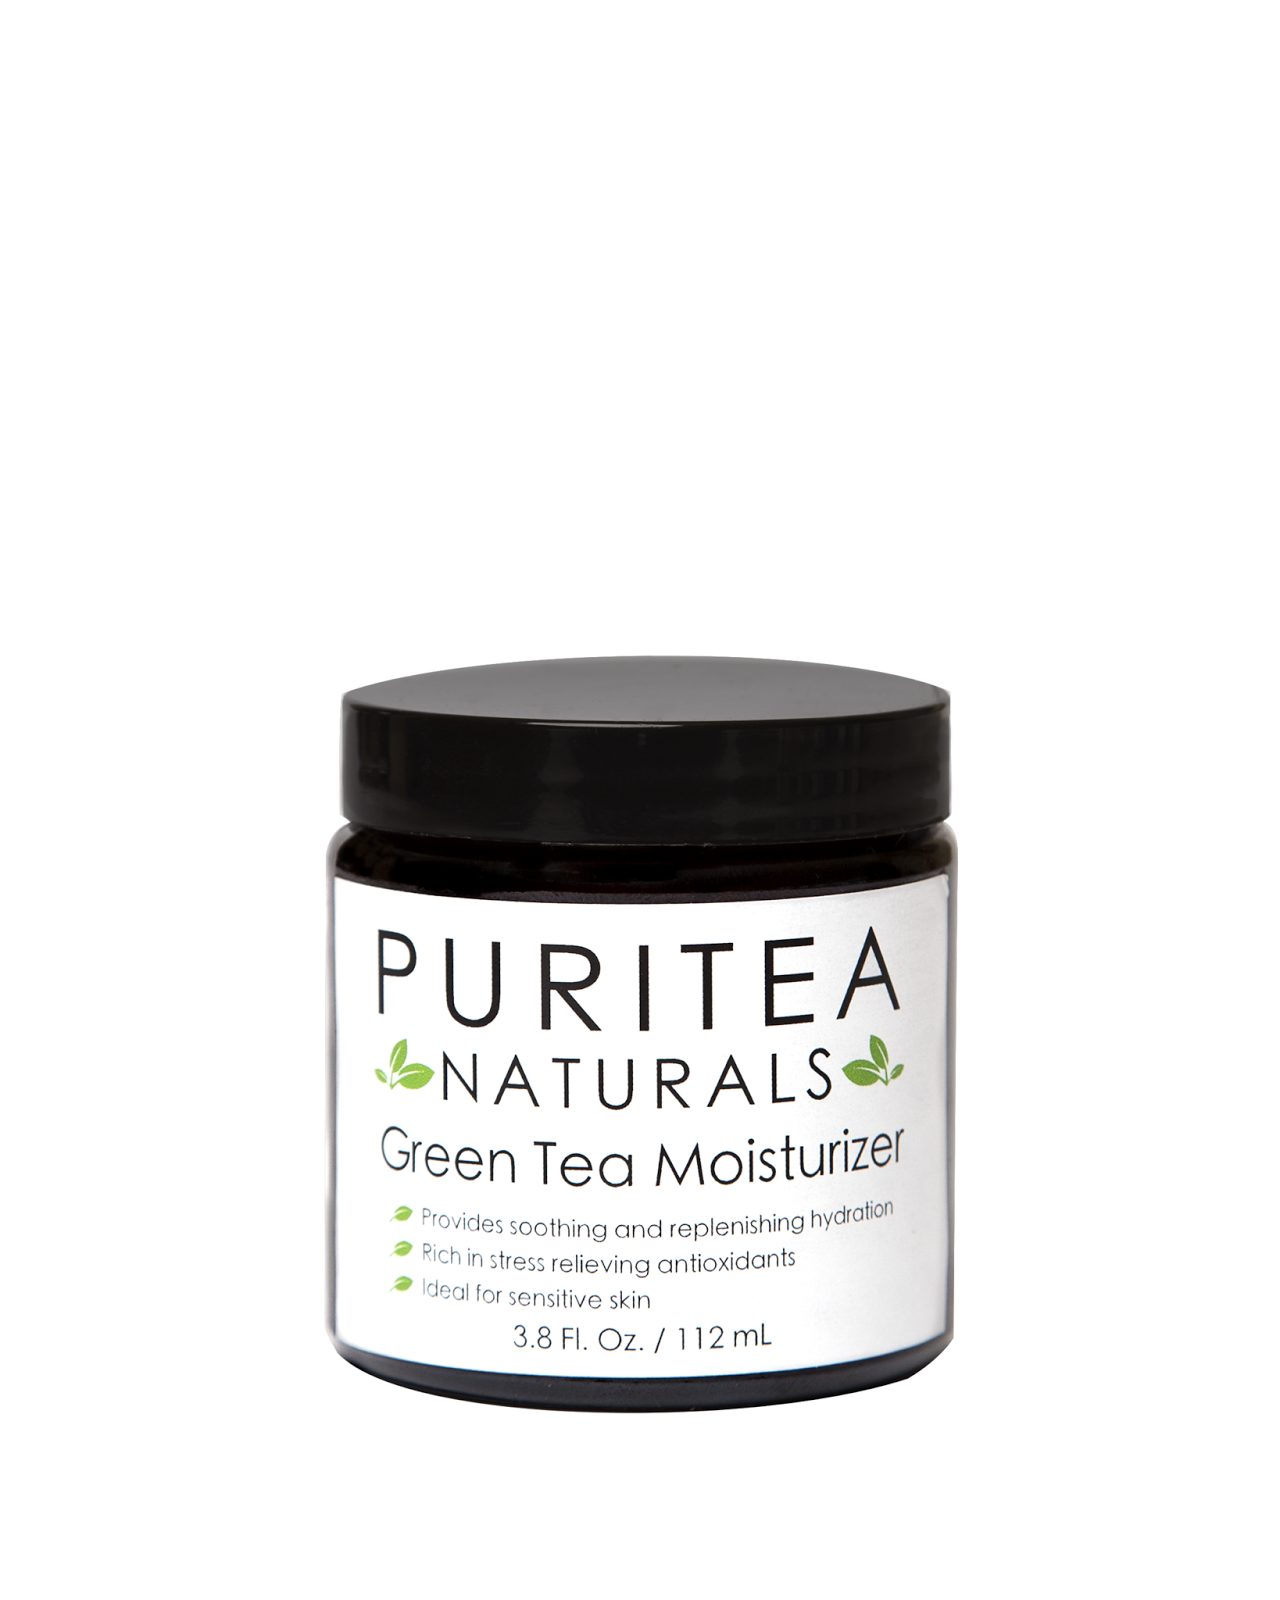 Tea Infused Beauty with Puritea Naturals